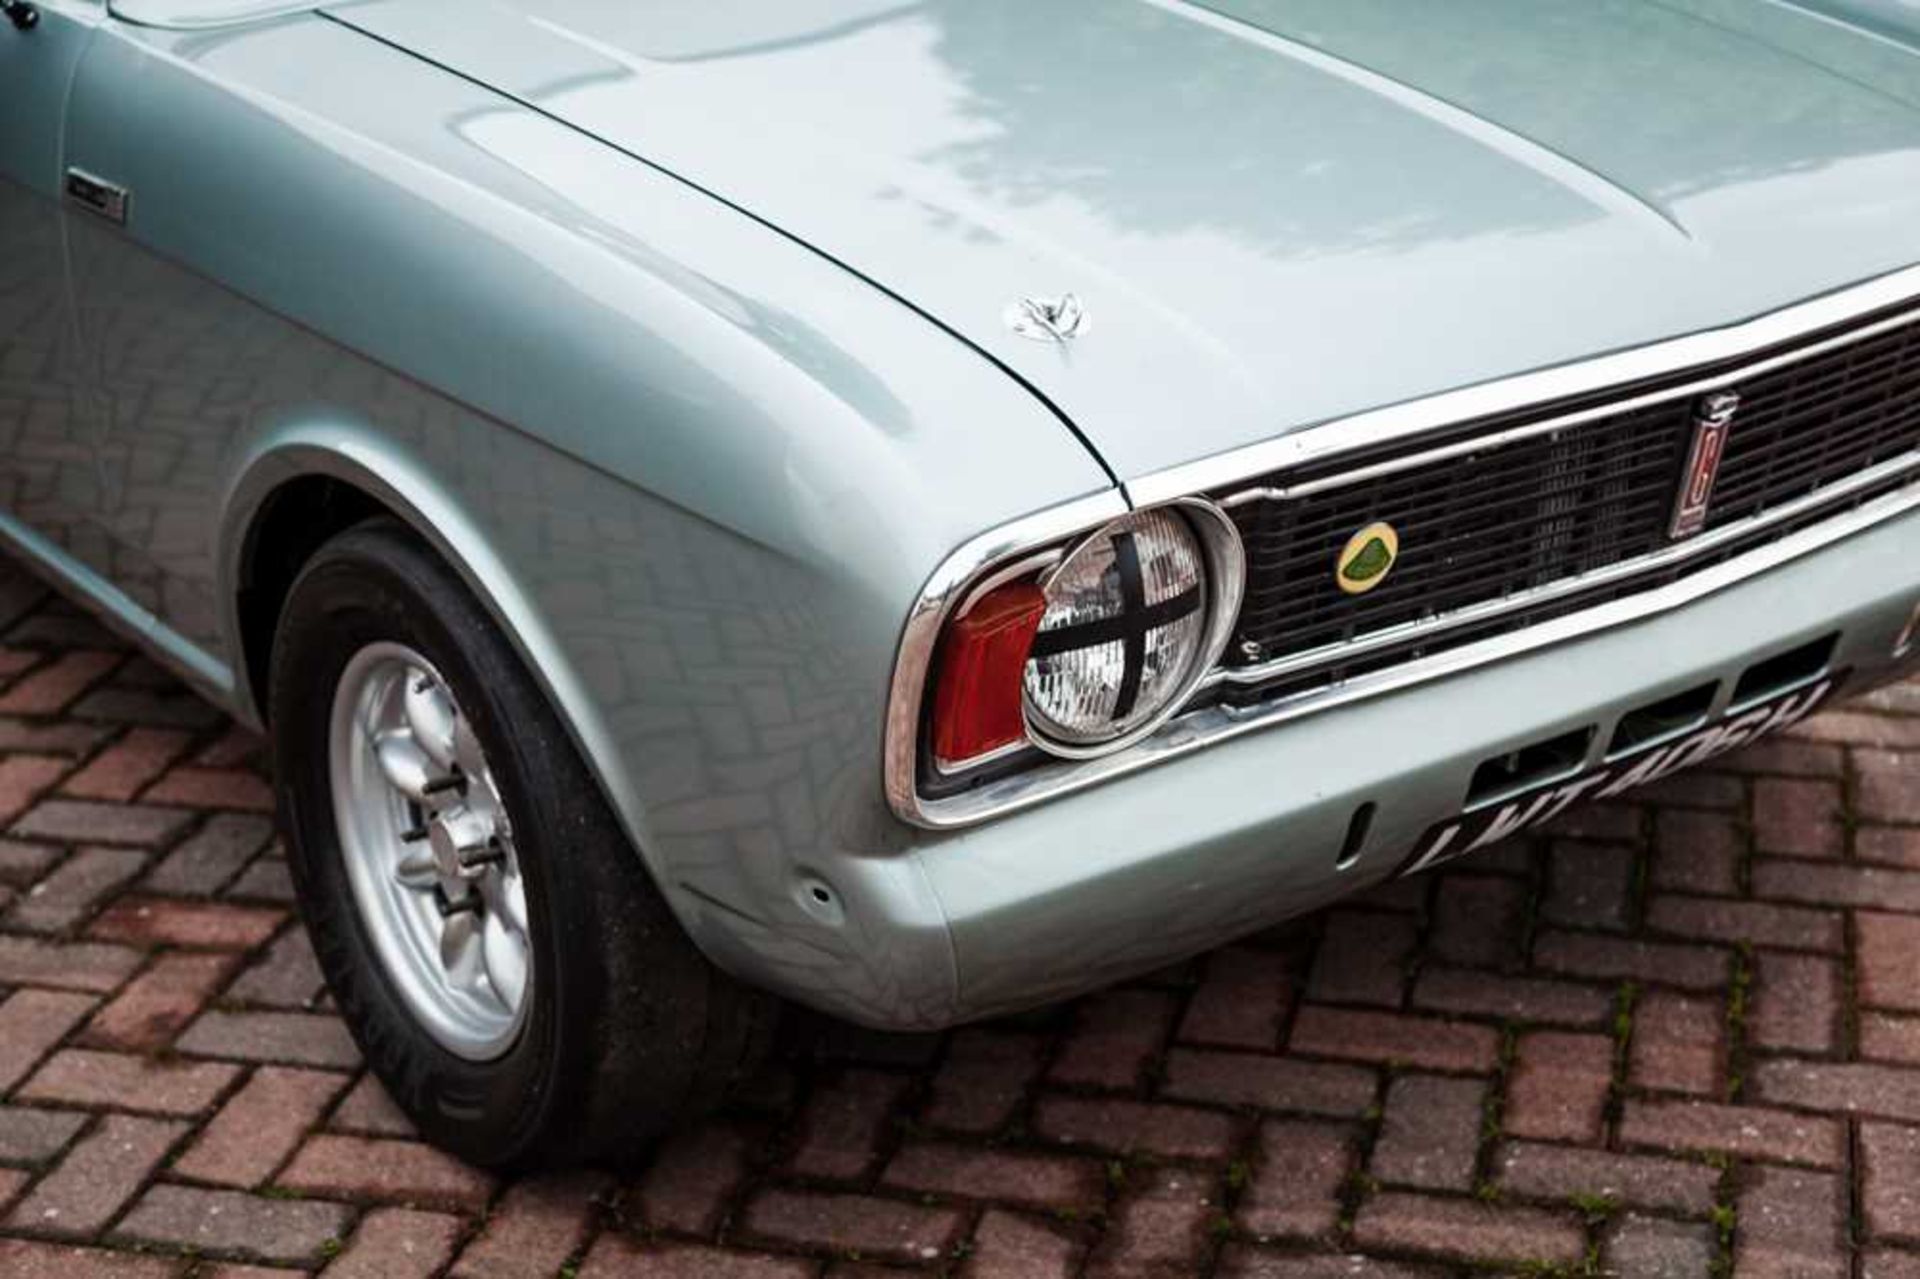 1969 Ford Cortina 'Lotus' Competition Saloon Powered by a 1598cc FIA-legal Lotus Twin-Cam with Twin - Image 32 of 55